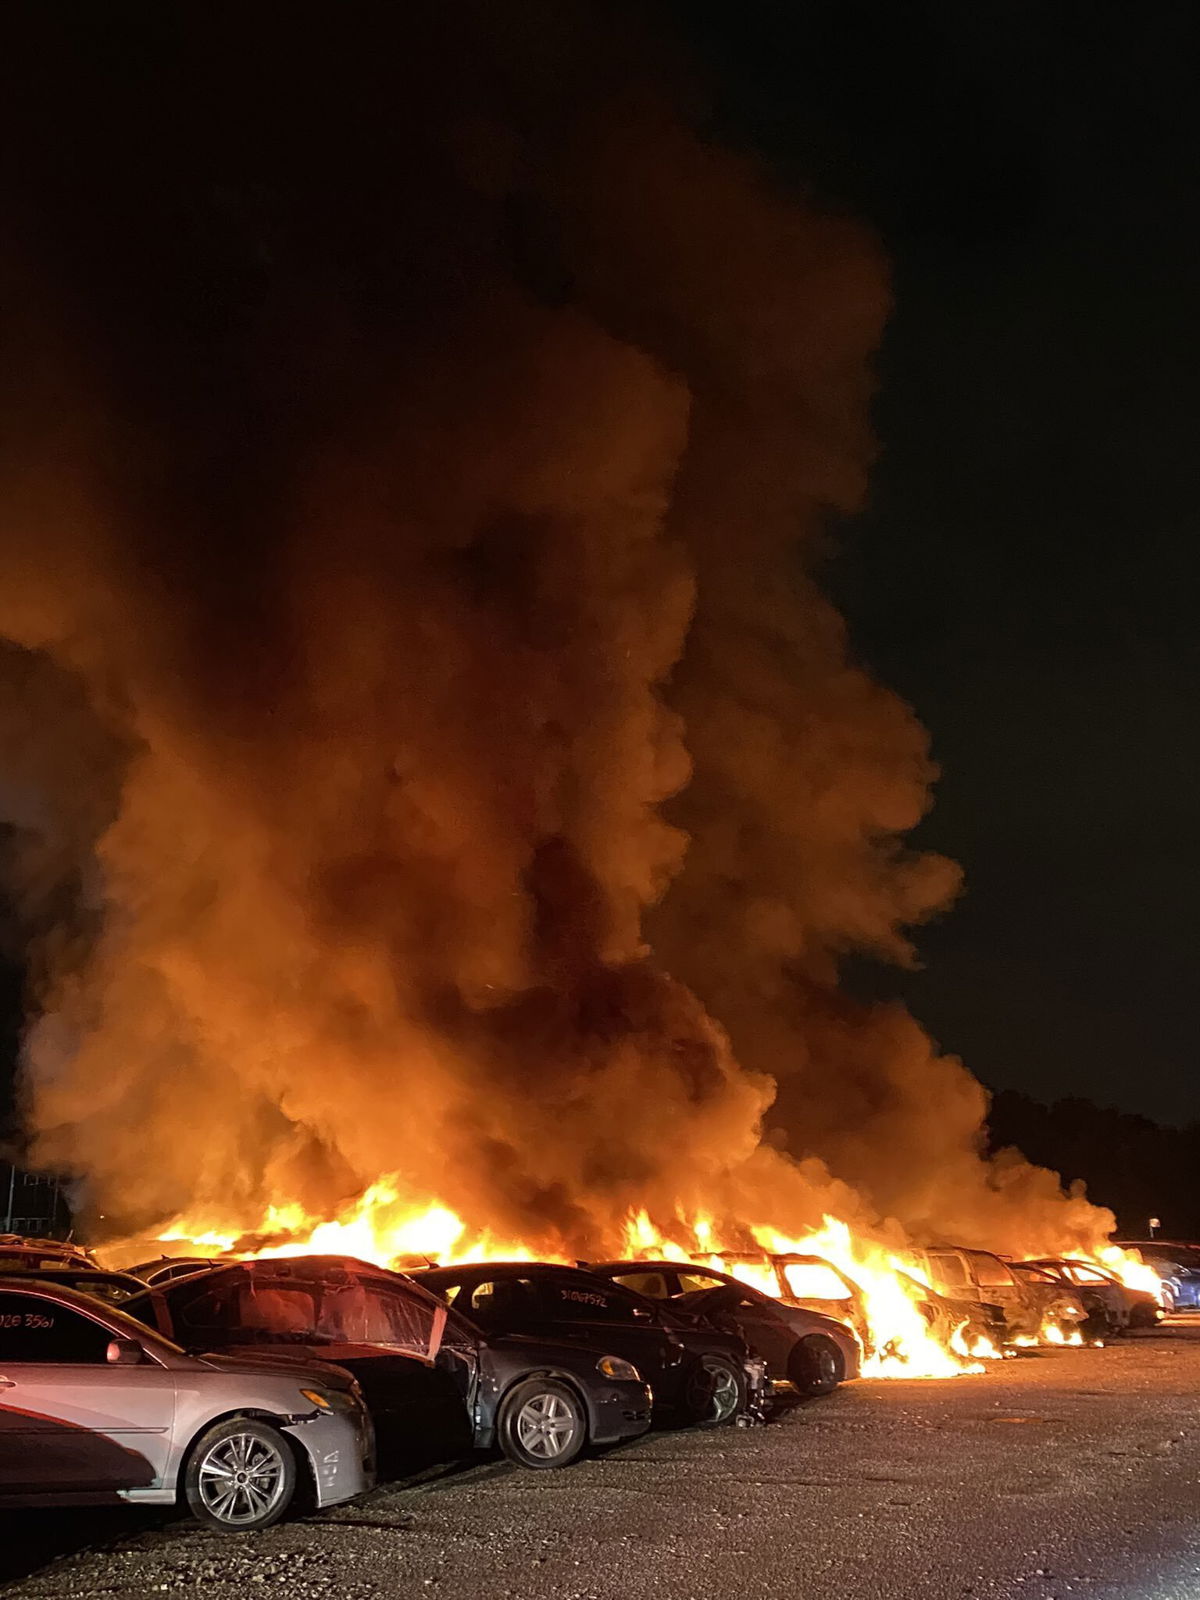 <i>Indianapolis Fire Department via WISH</i><br/>Nearly 40 vehicles were destroyed in an overnight fire